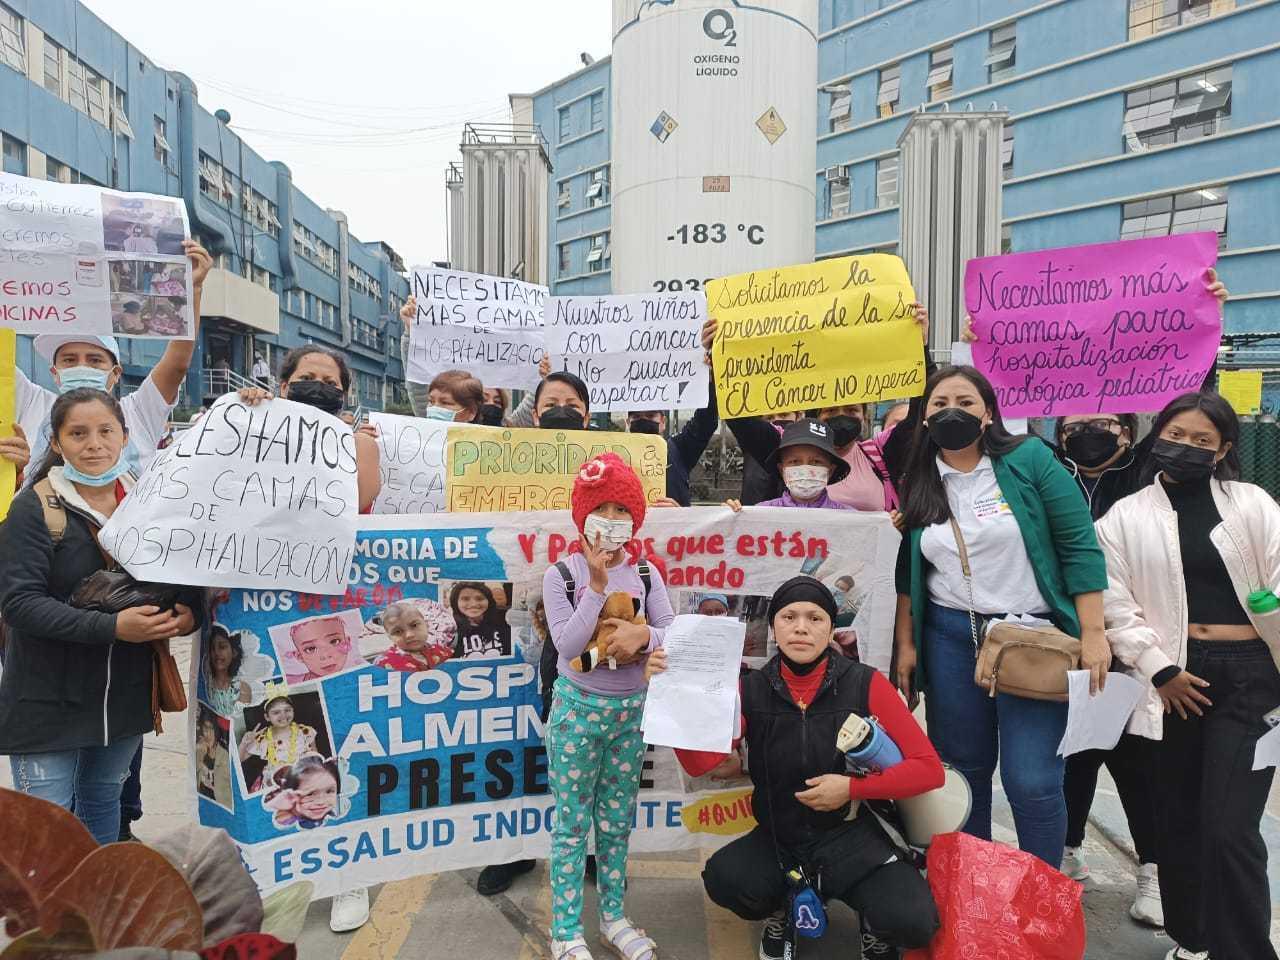 Children with leukemia and their parents protest demanding accountability for cancer patients, Lima, Peru, June 2023.